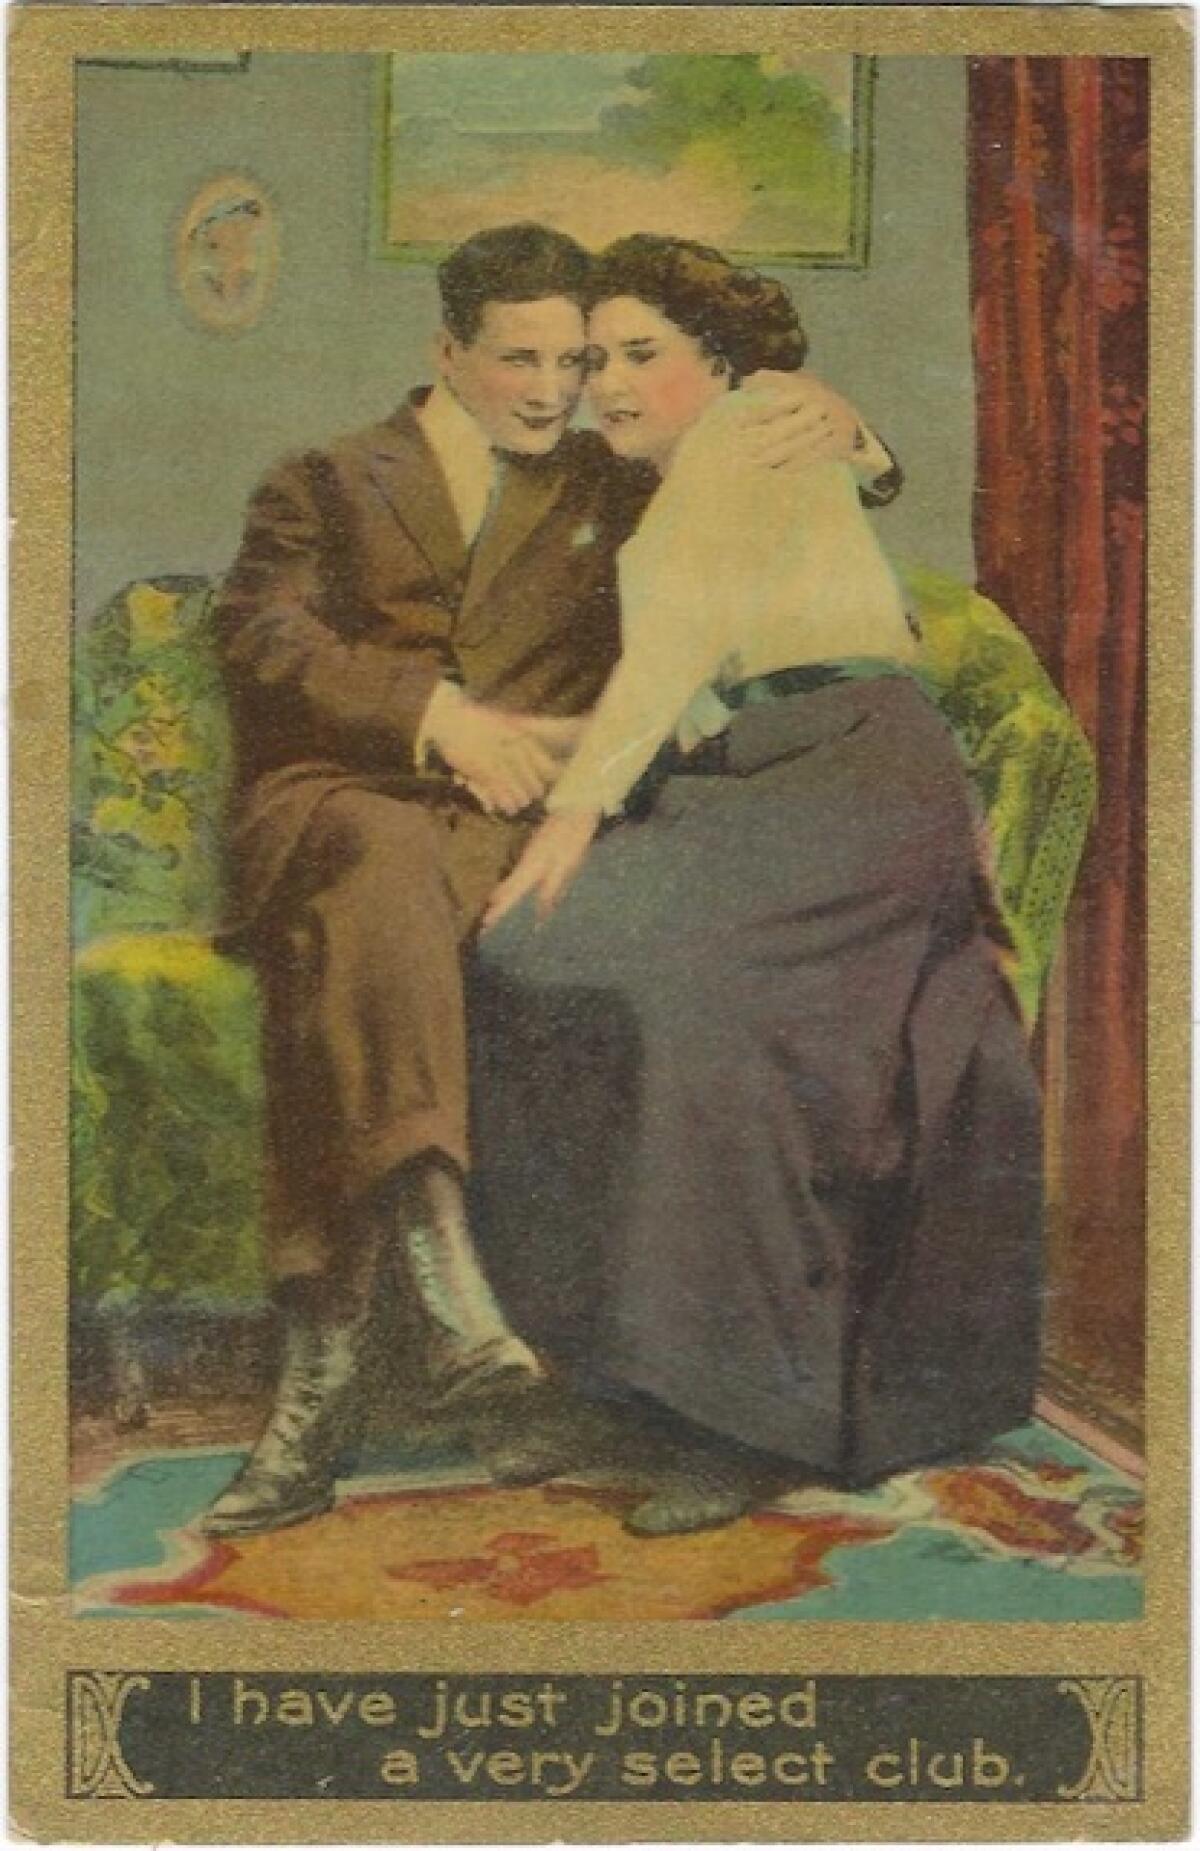 A man and a woman embrace. Text: "I have just joined a very select club."